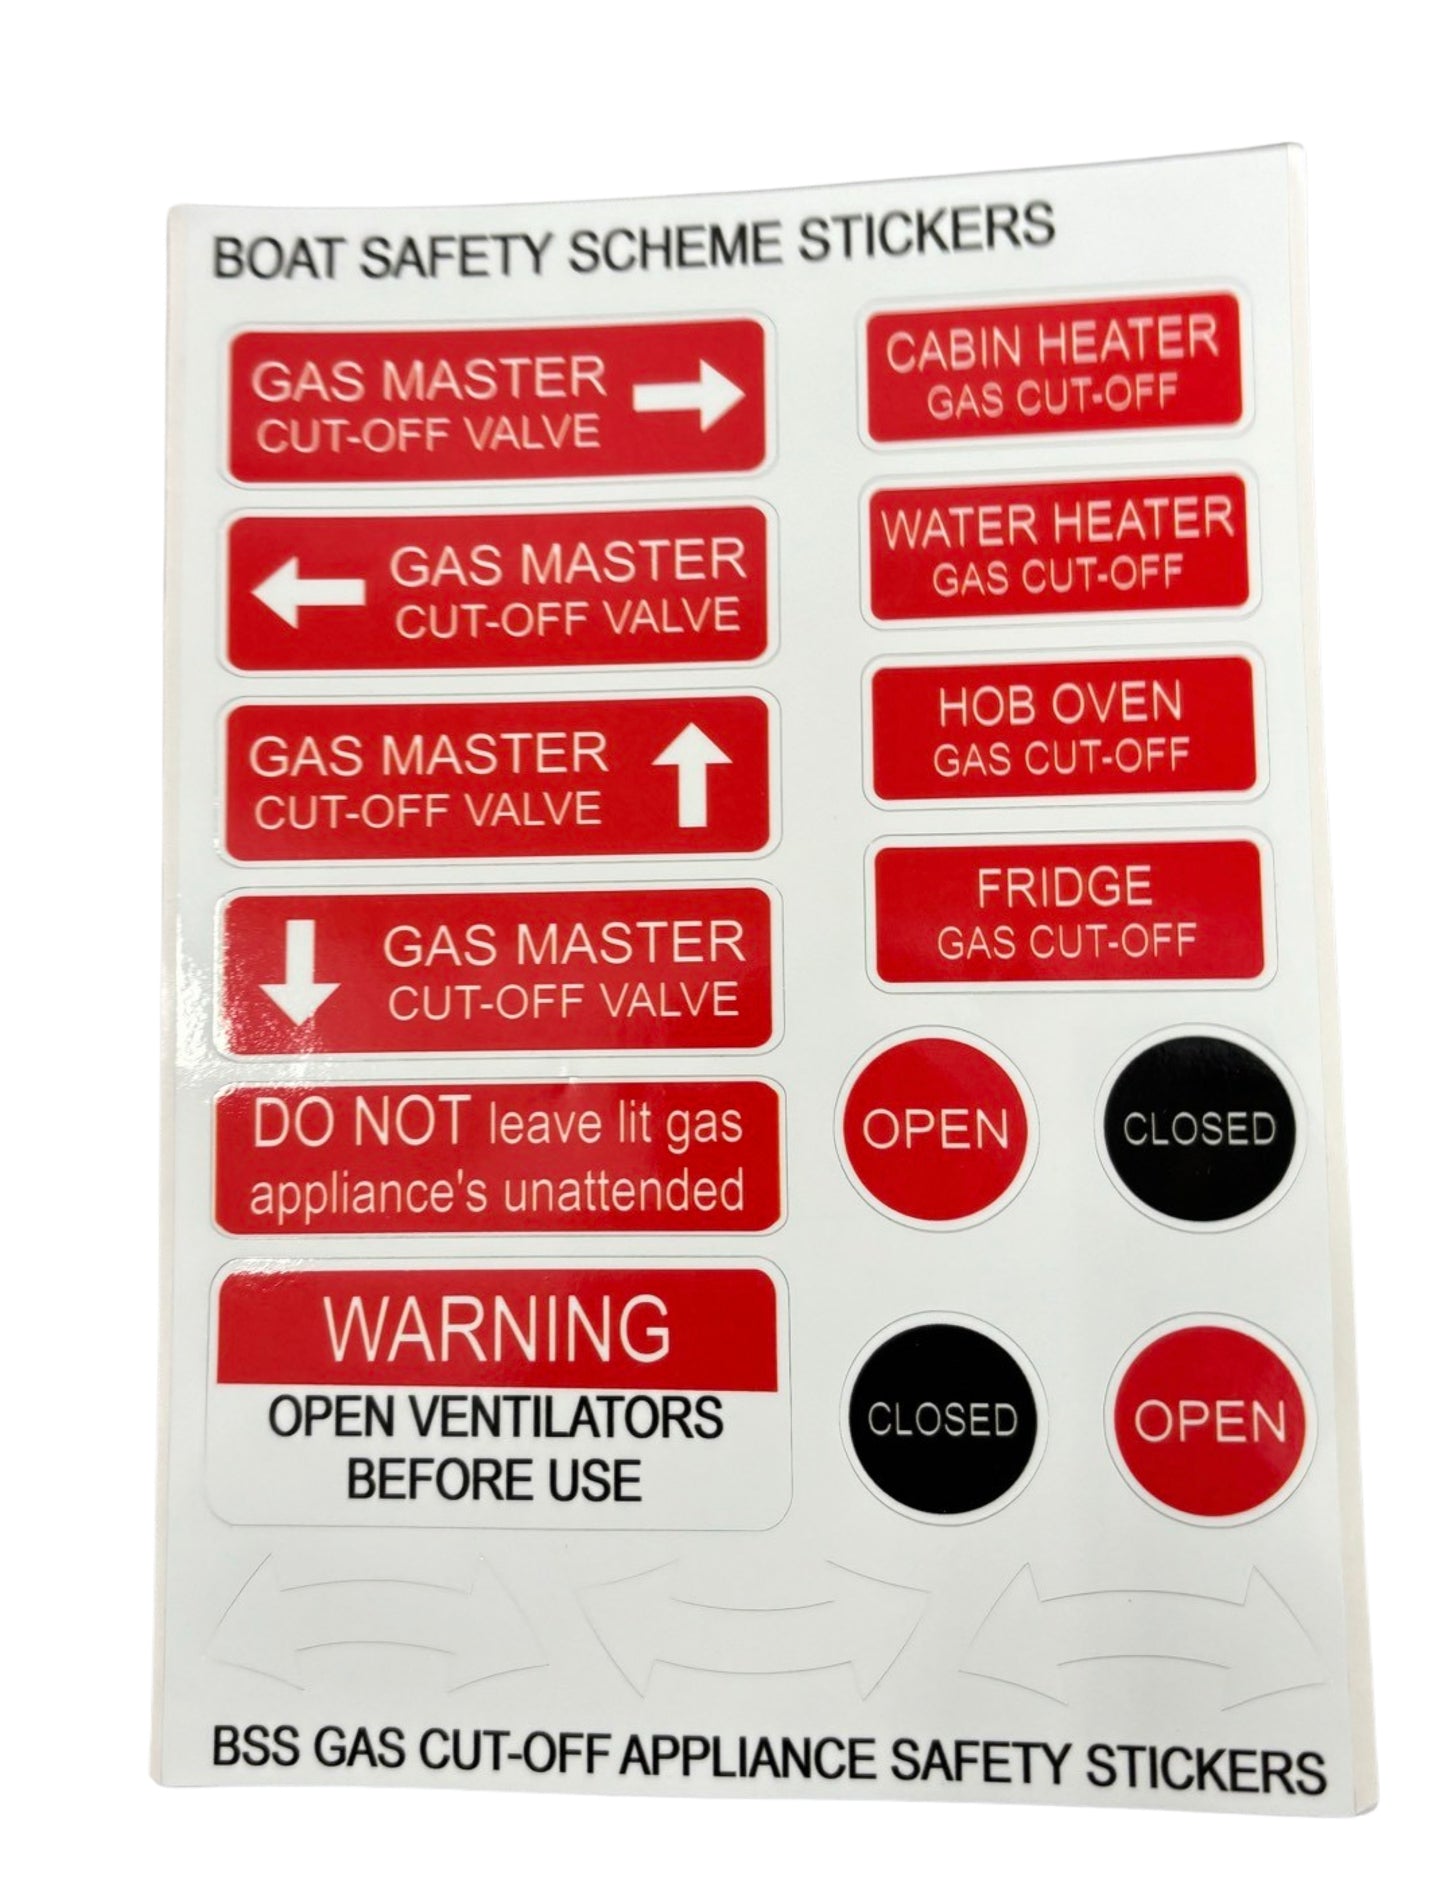 BSS Gas Cut-Off Appliance - Boat Safety Scheme safety stickers (A5 Size)